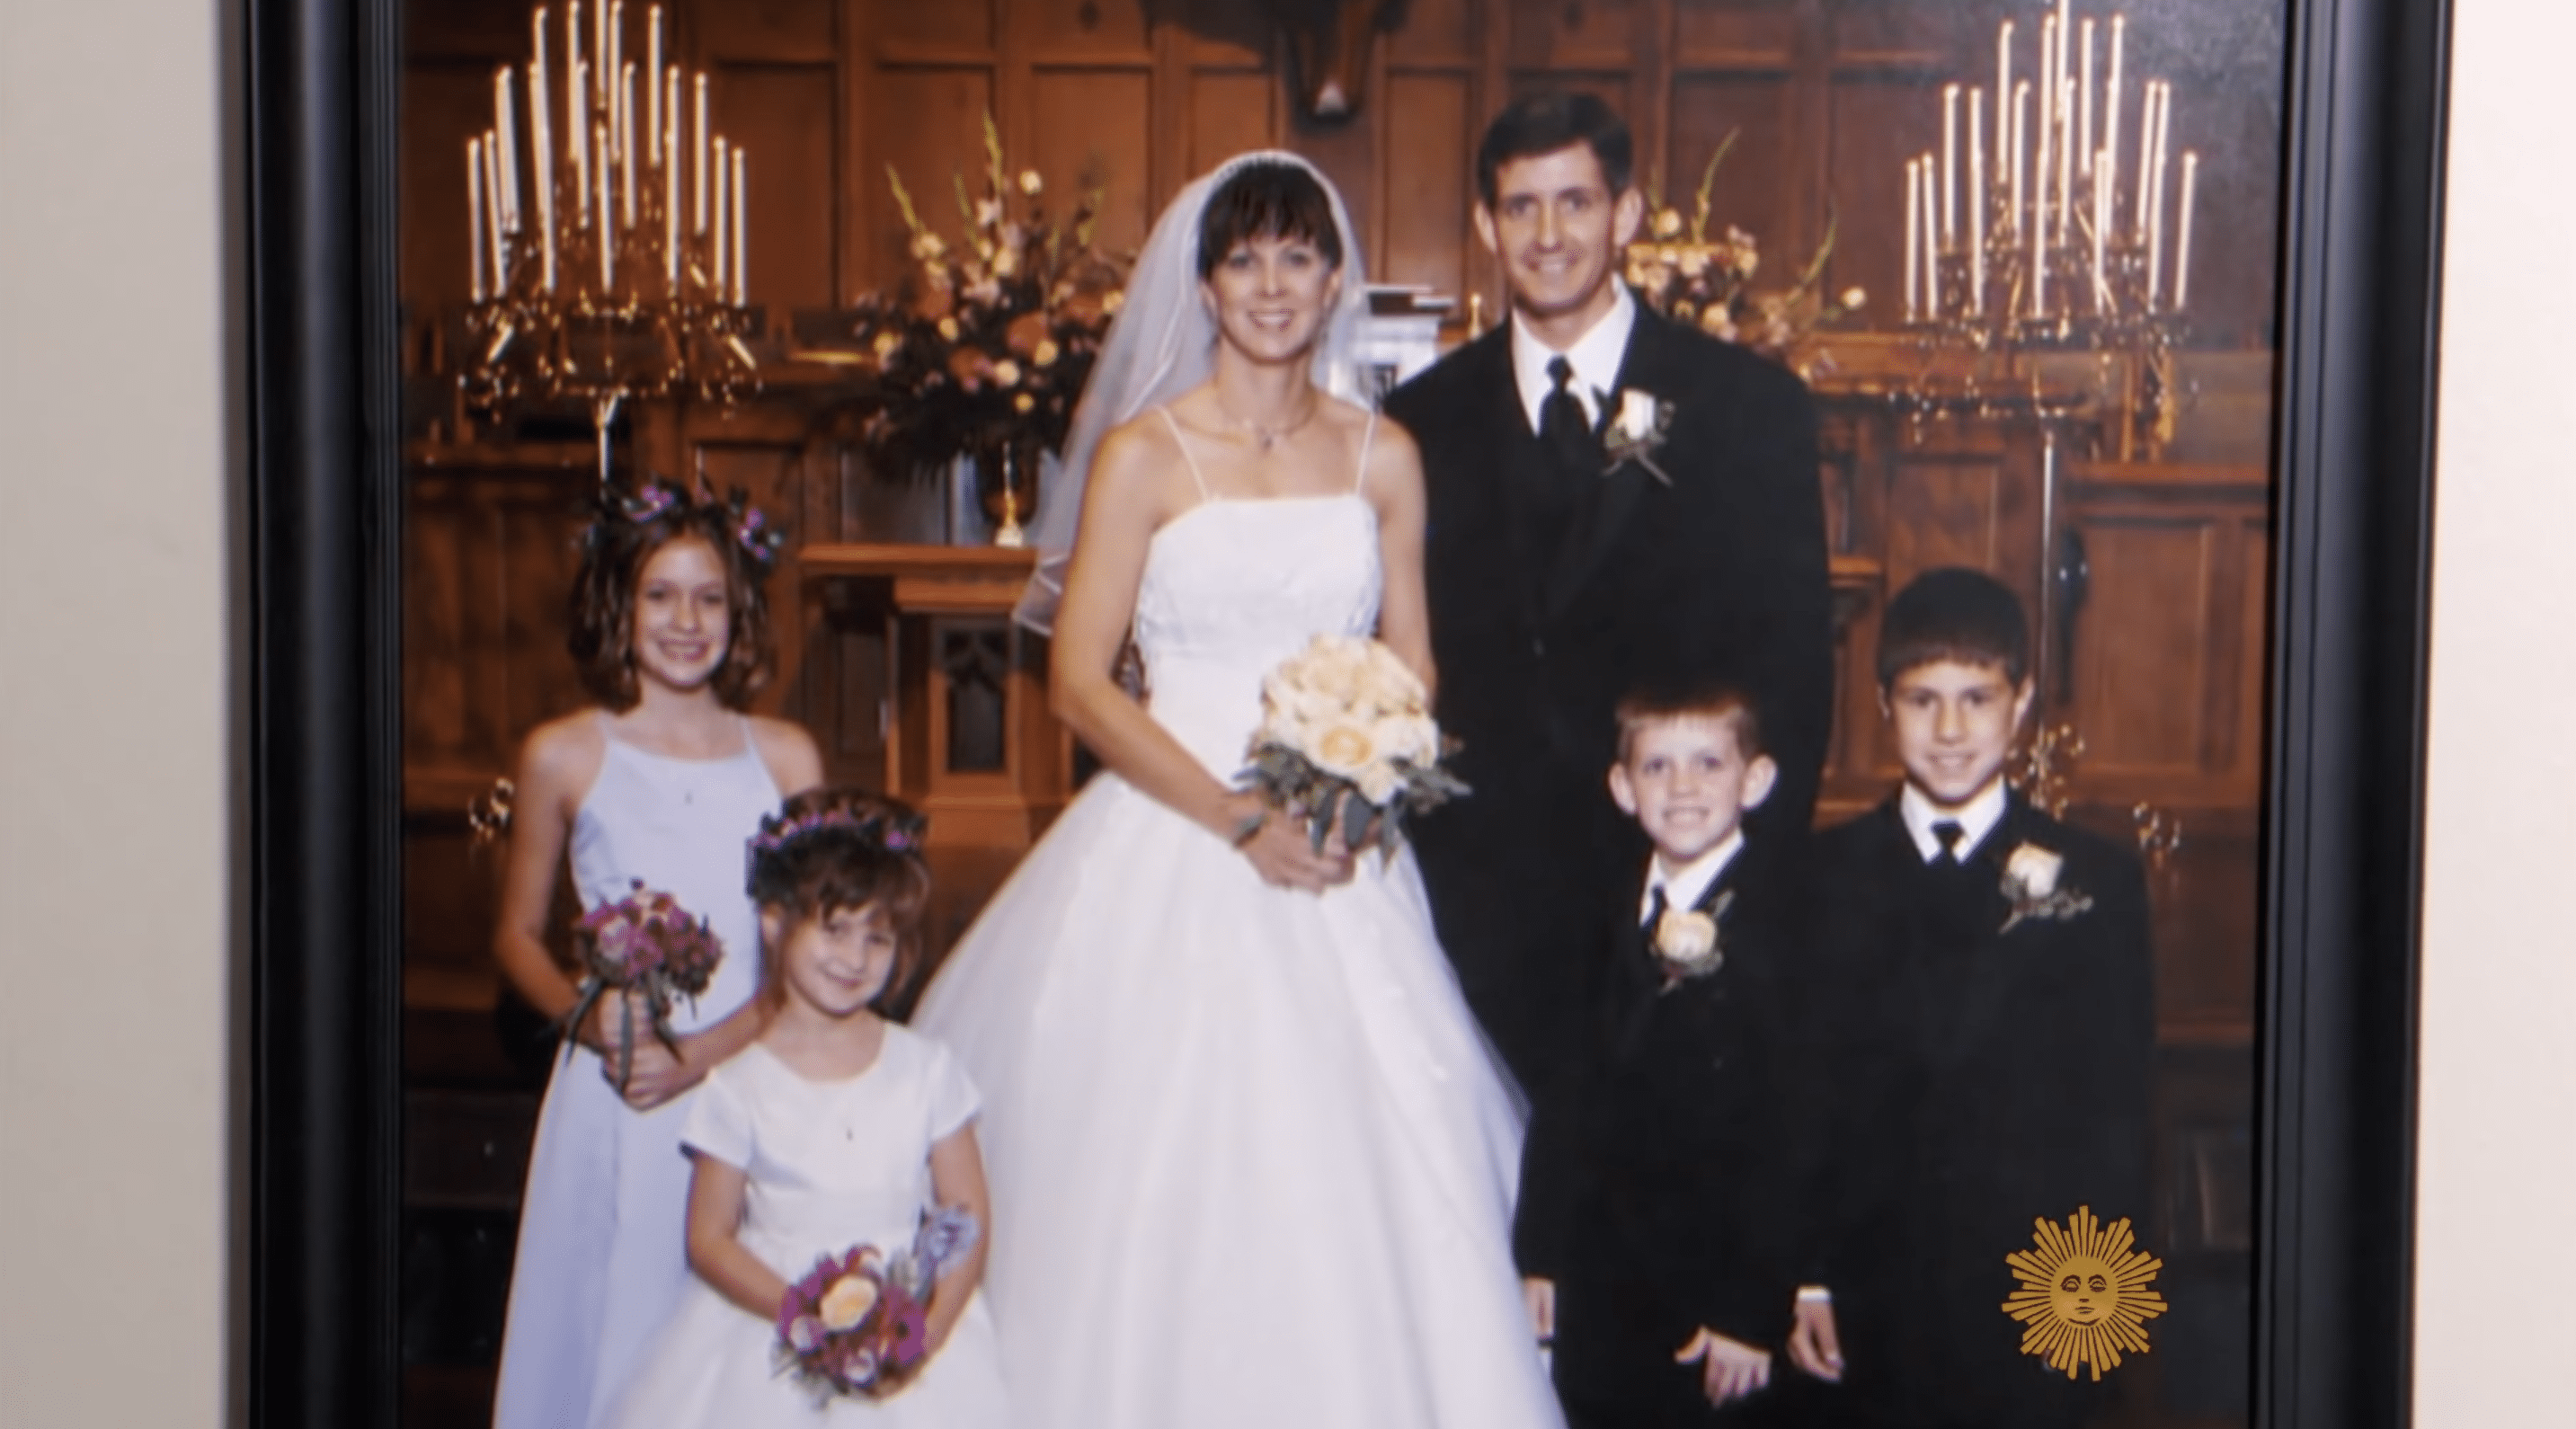 Angela and Jeff Hartung surrounded by their children on their wedding day. | Photo: YouTube.com/CBS Sunday Morning